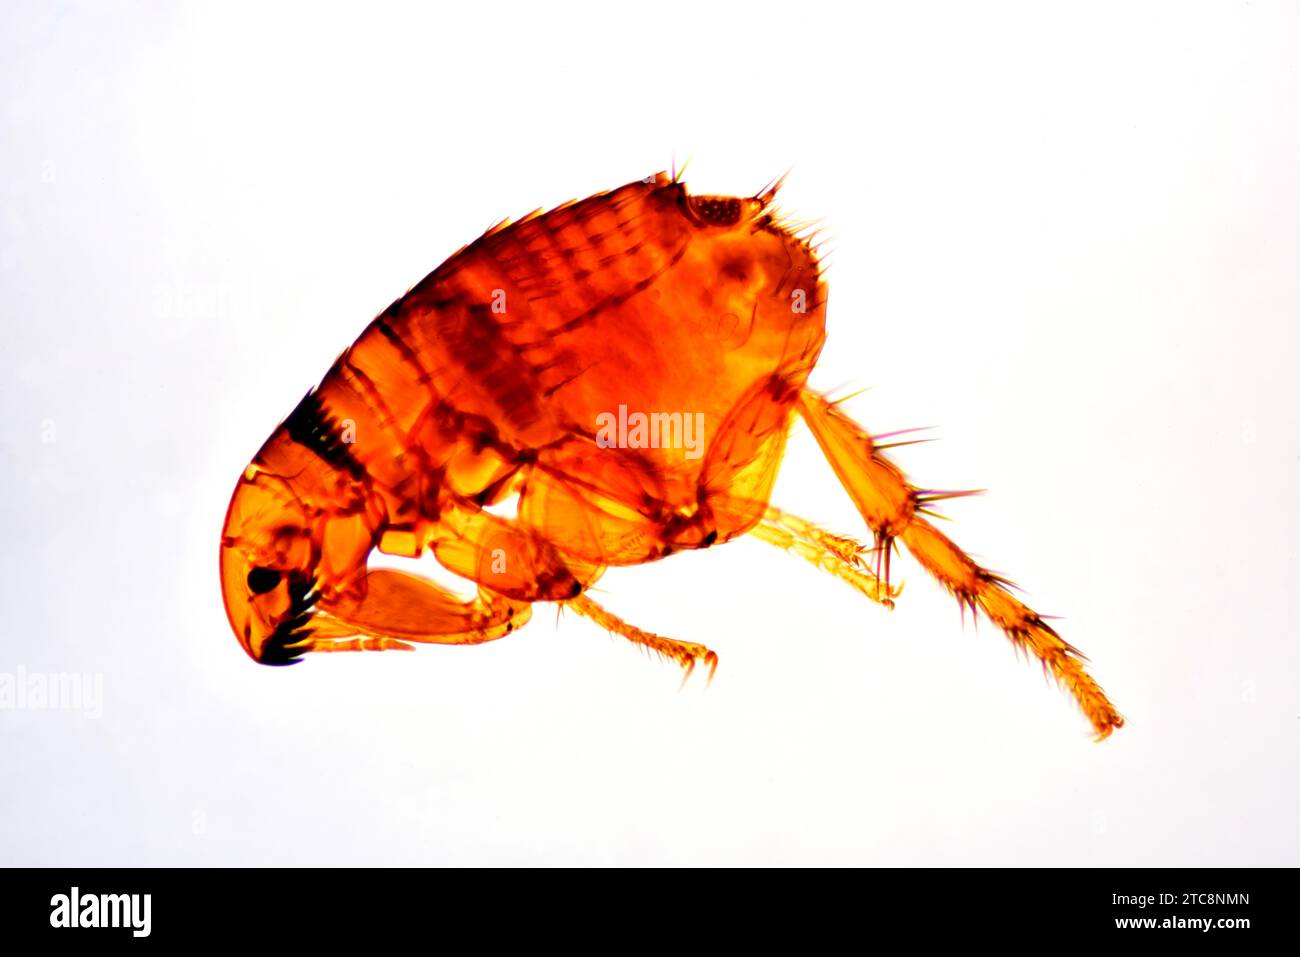 Dog flea (Ctenocephalides canis) is an hematophagous parasitic insect. Complete specimen. Light microscope X50 at 10 cm wide. Stock Photo